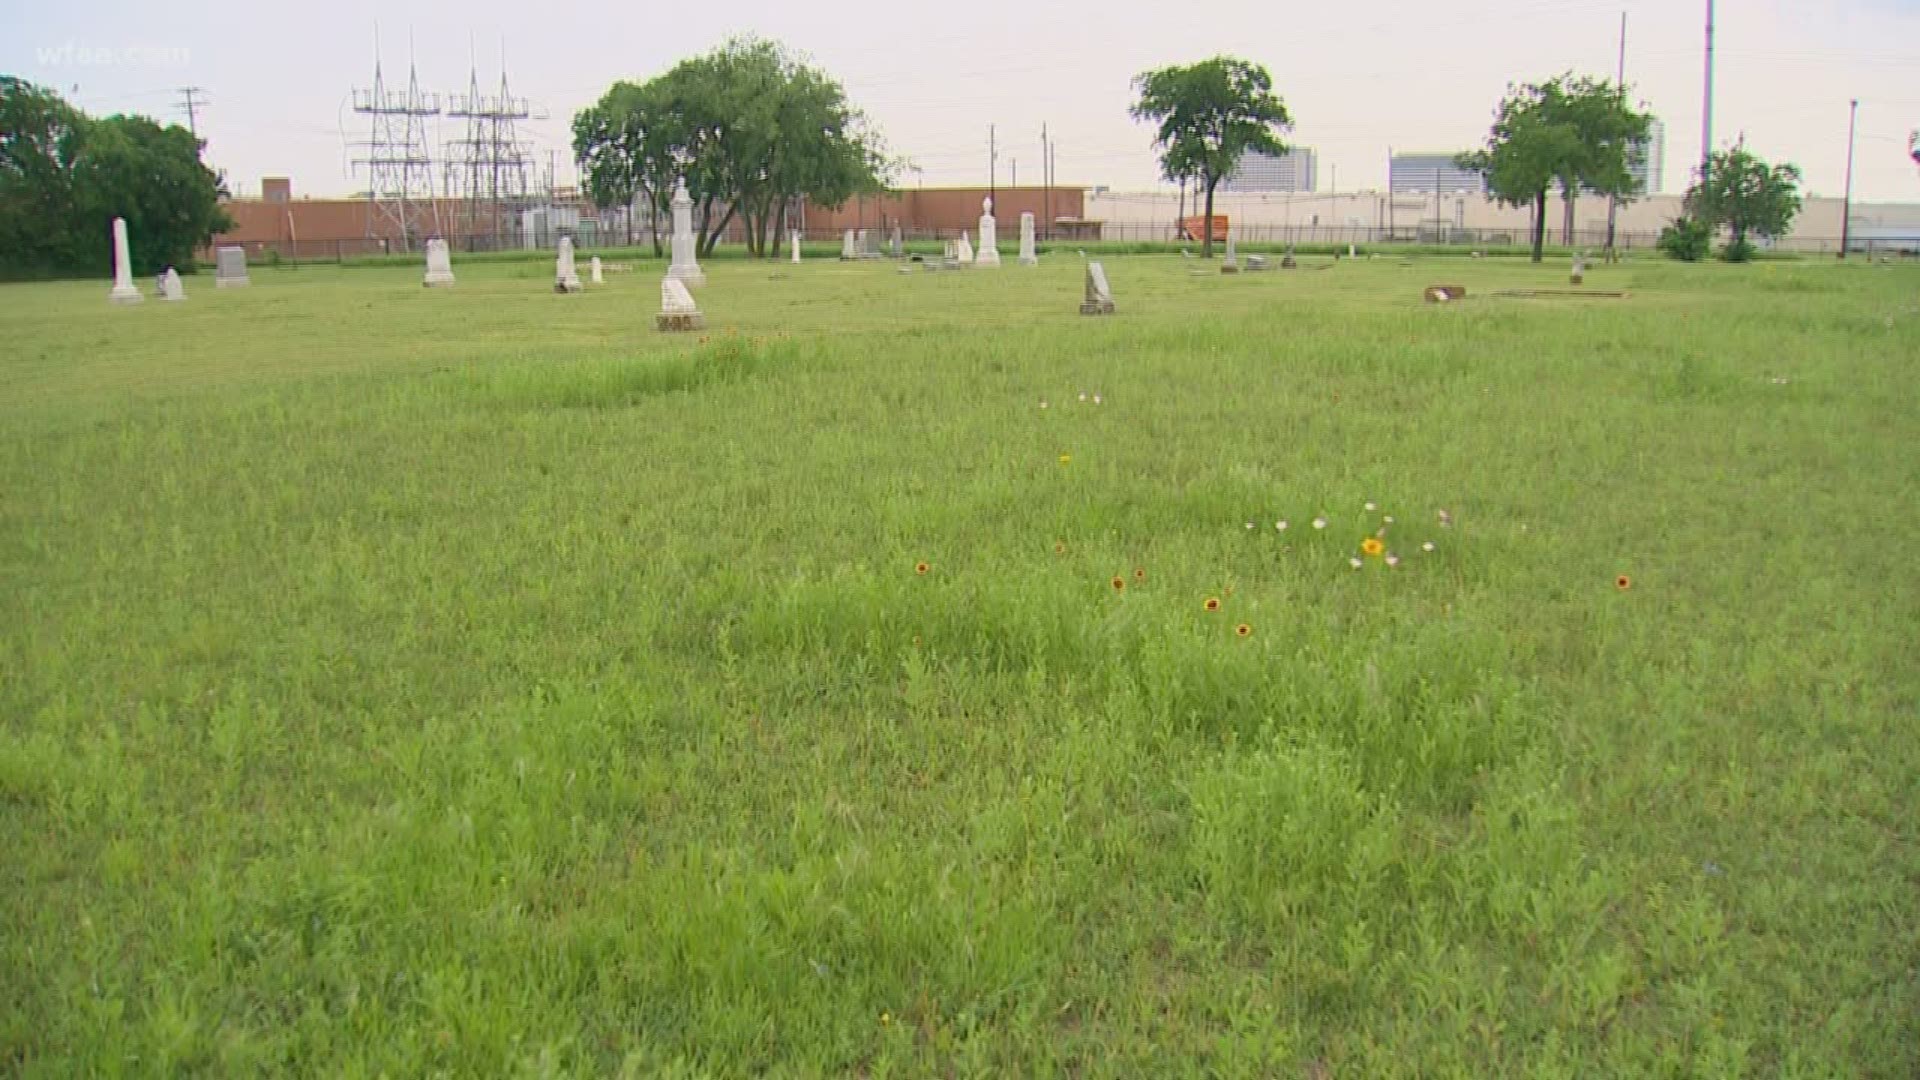 A four-year project found 29 unmarked graves. Now, some are hoping to identify those unnamed.